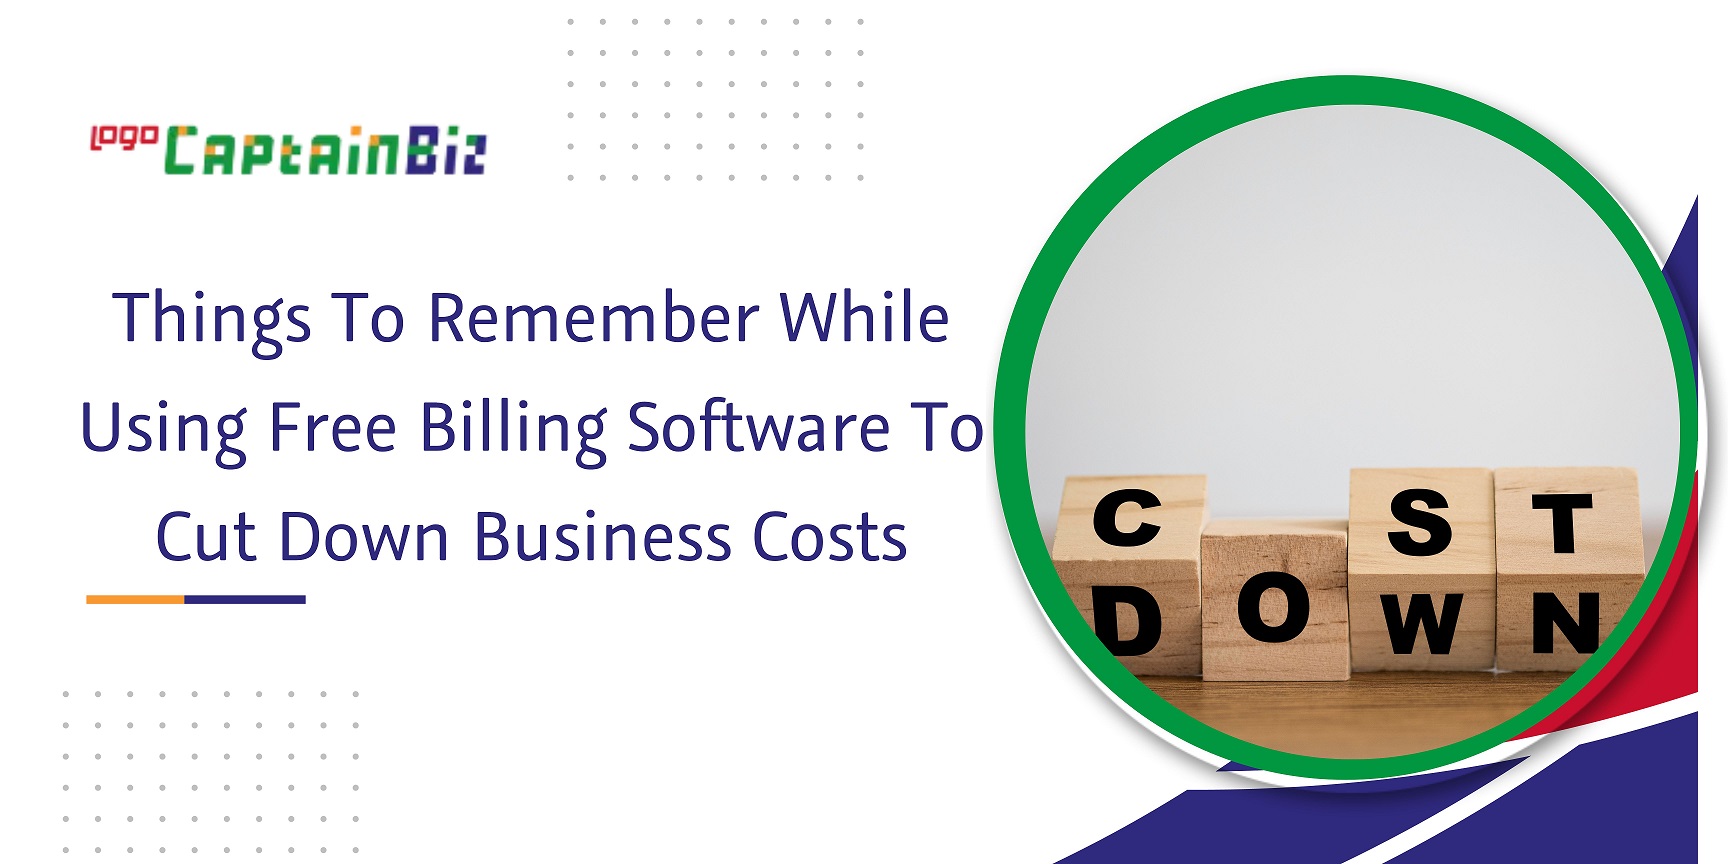 CaptainBiz: things to remember while using free billing software to cut down business costs